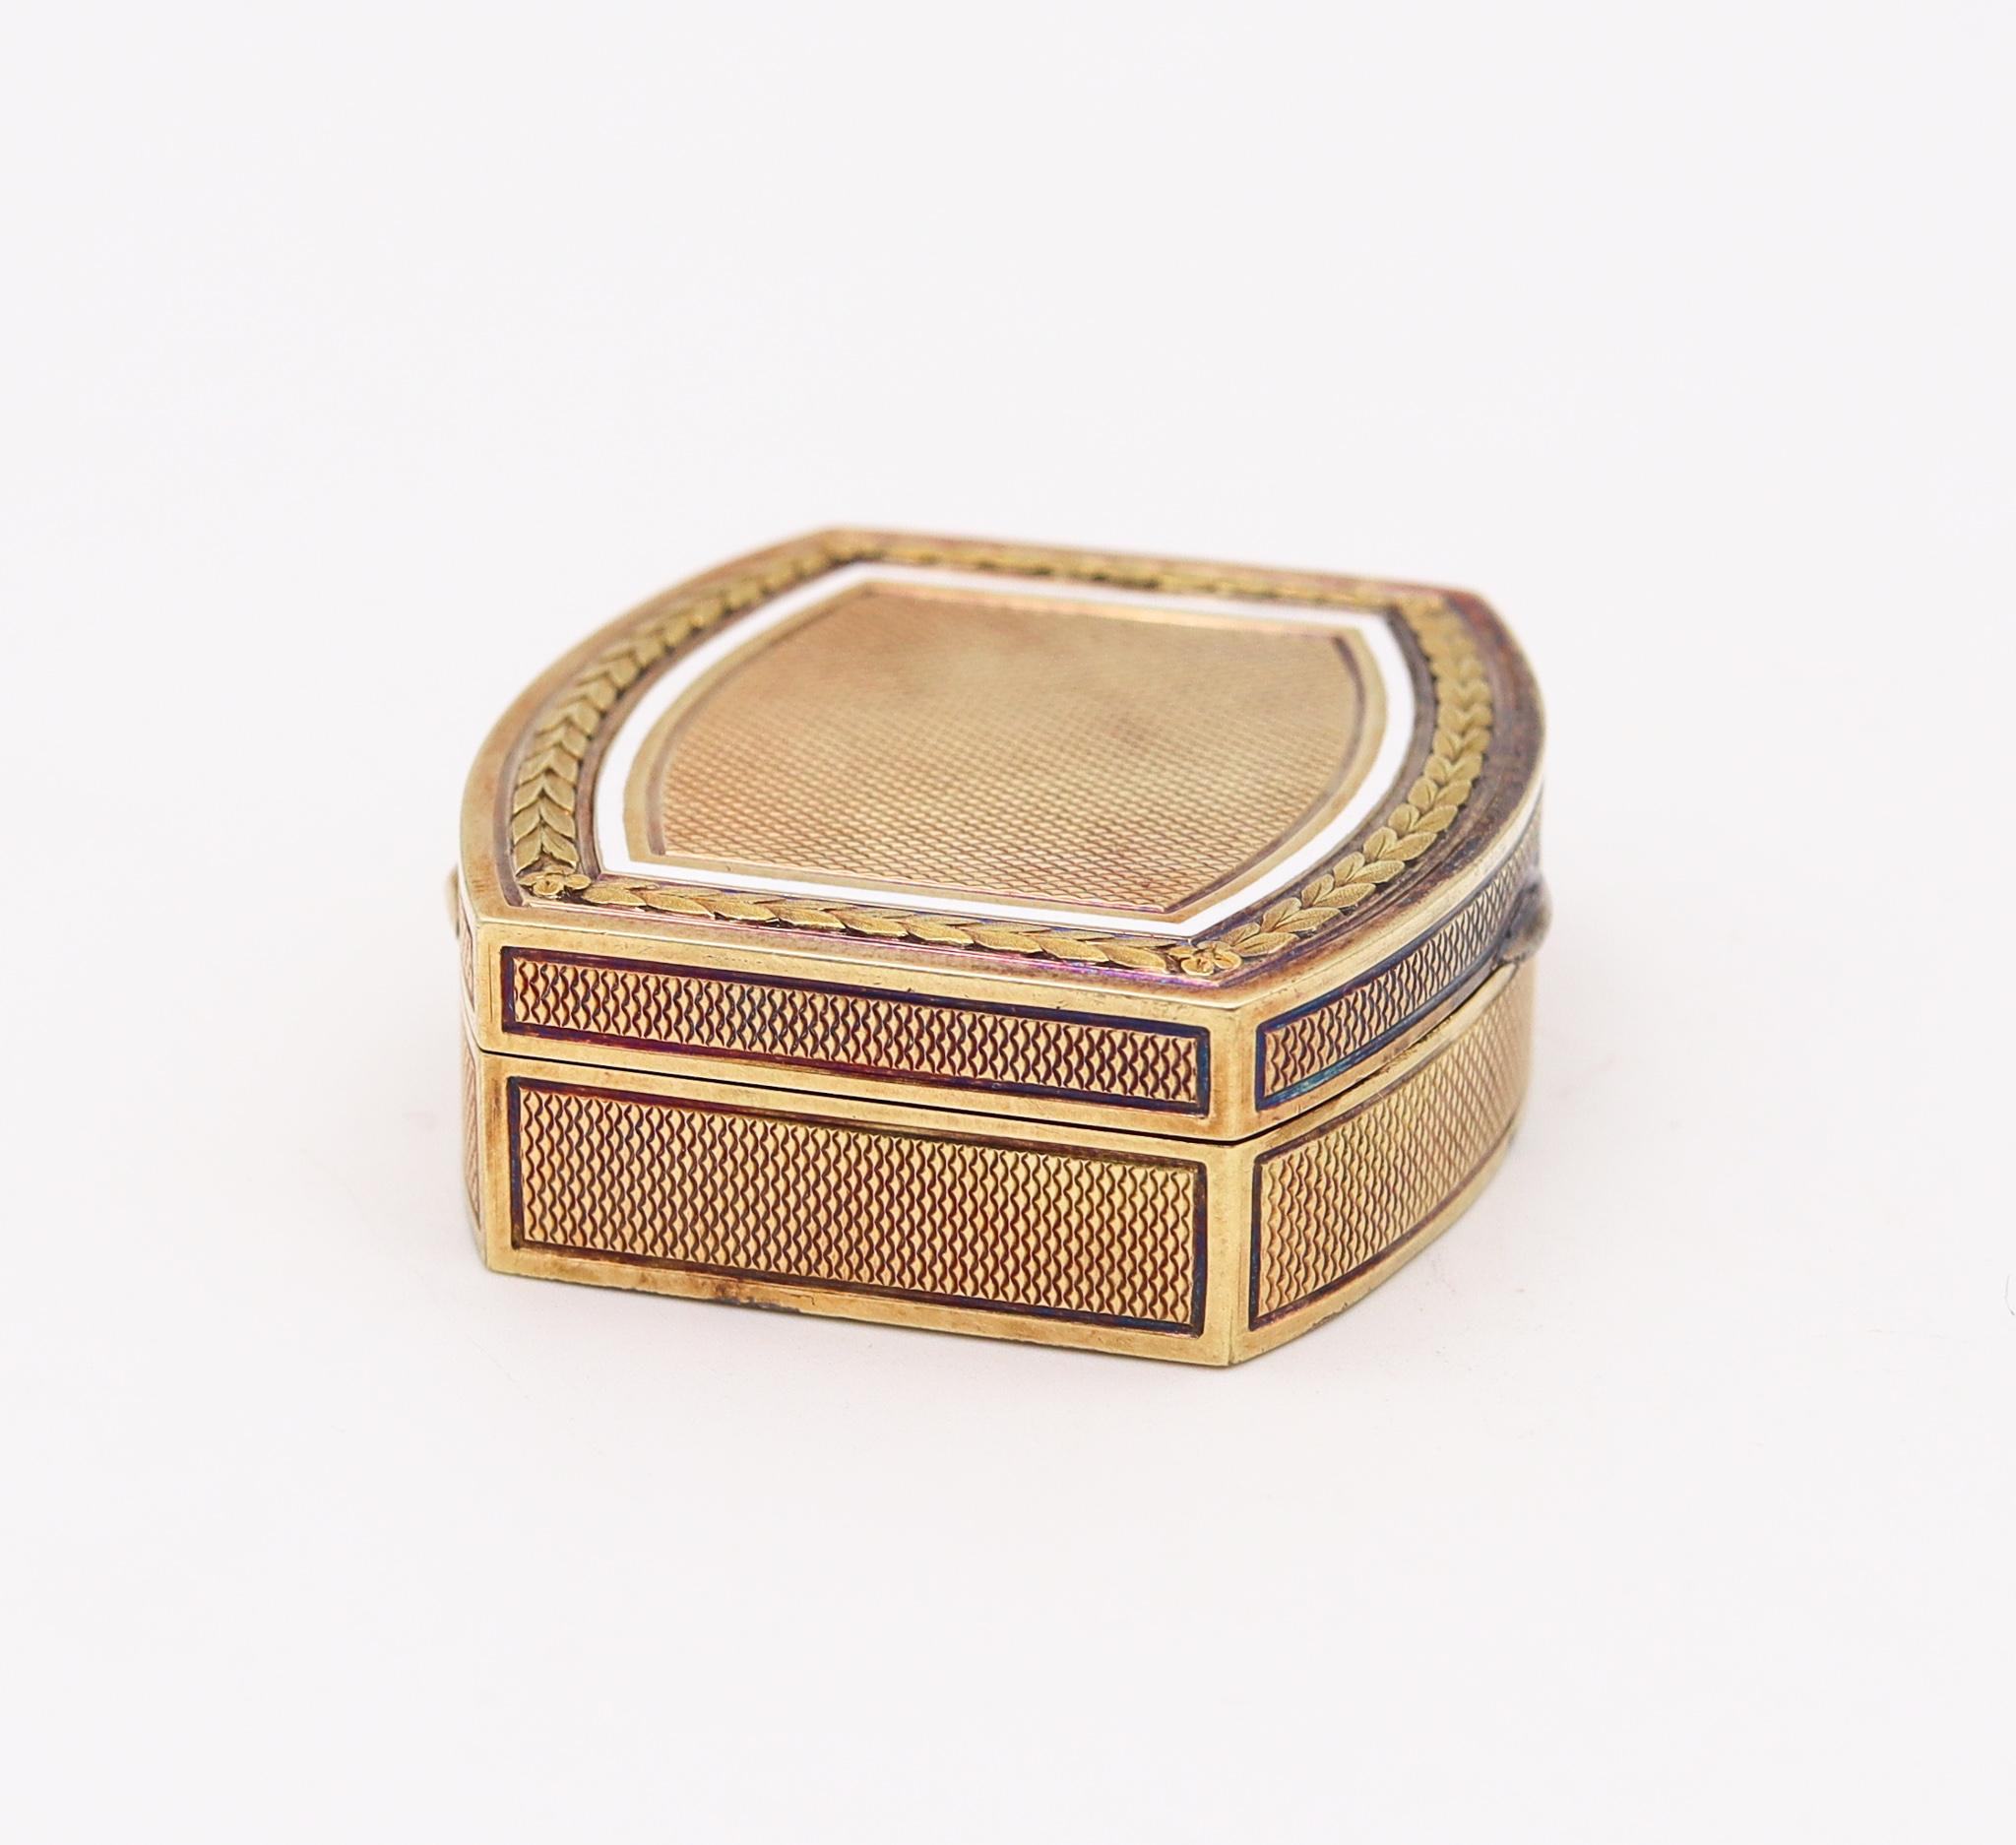 Henrik Wigström 1908 Russia Saint Petersburg Enameled Snuff Box in 14kt Gold In Excellent Condition For Sale In Miami, FL